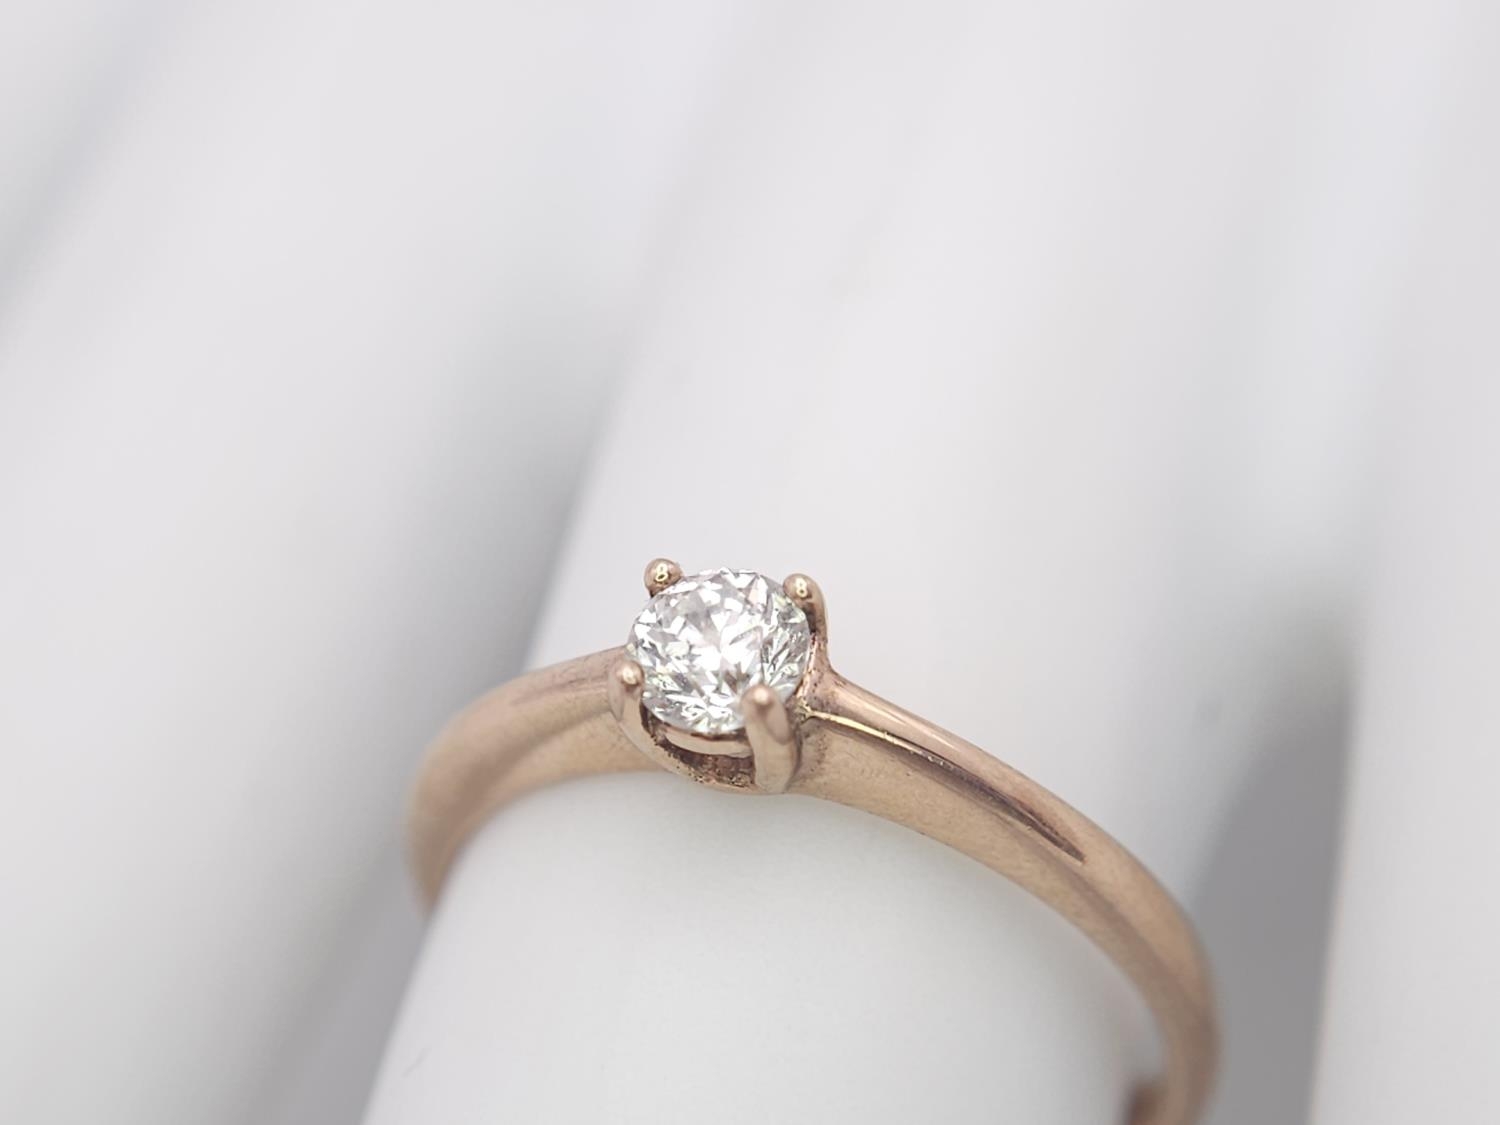 A 9K Rose Gold Diamond Solitaire Ring. 0.10ct round cut diamond. Size N. 2g total weight. - Image 7 of 7